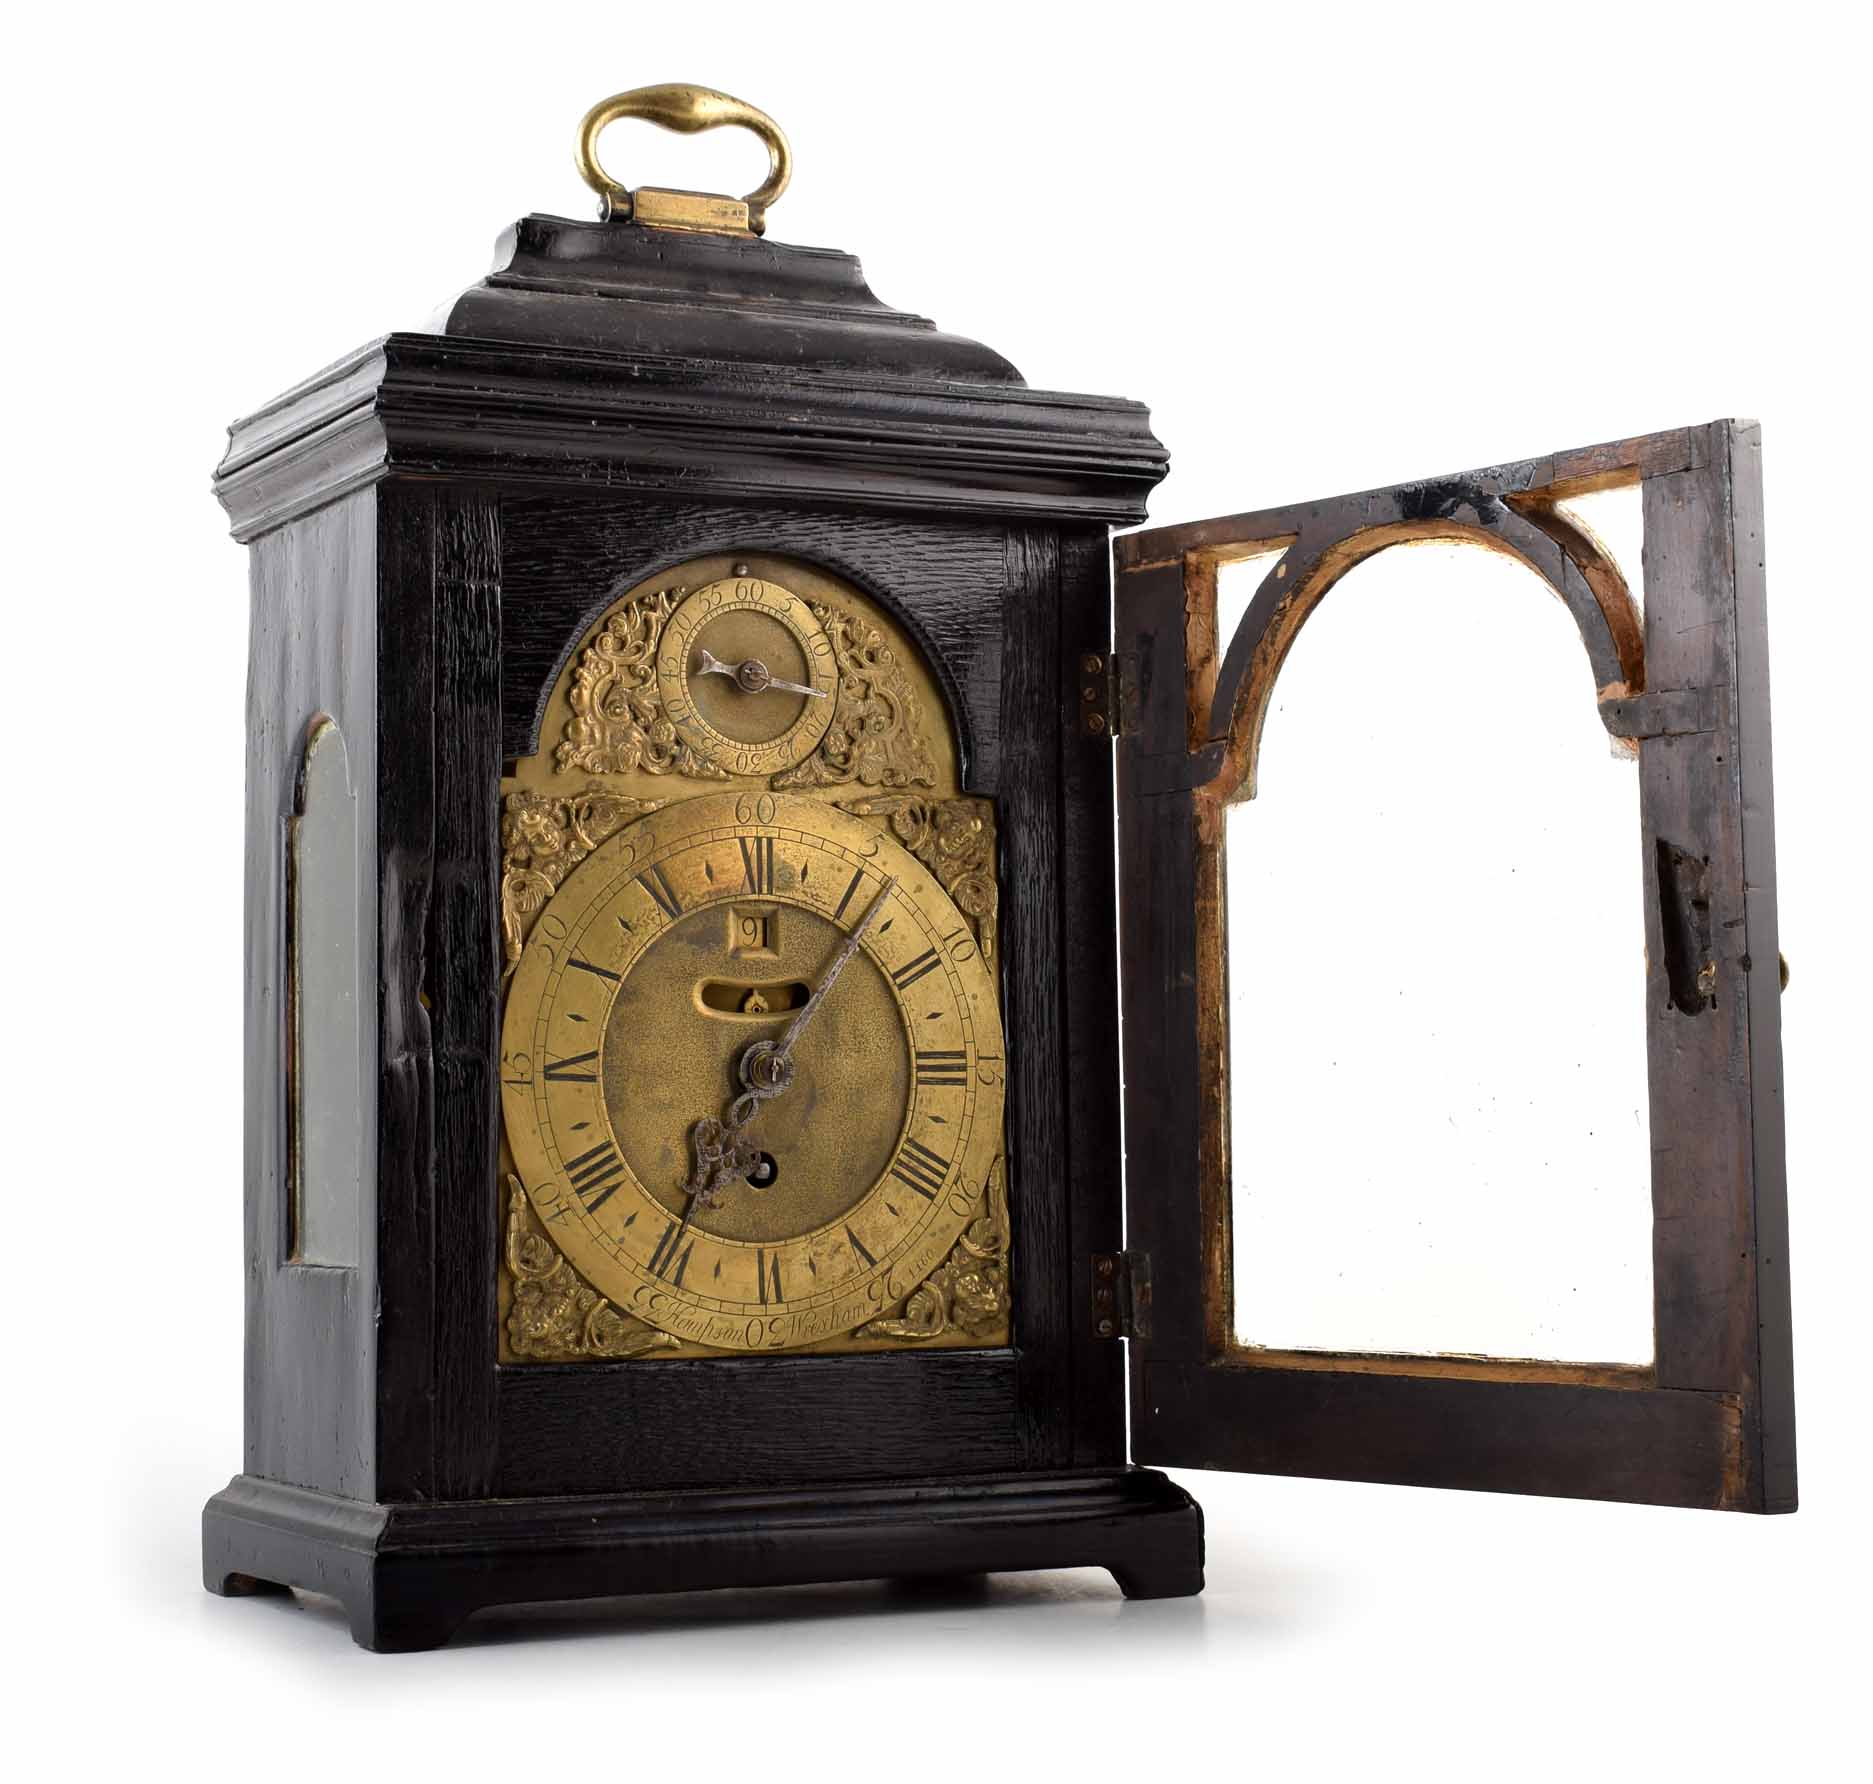 A mid 18th century ebonized bracket clock. Brass face with brass spandrels, Roman and Arabic chapter